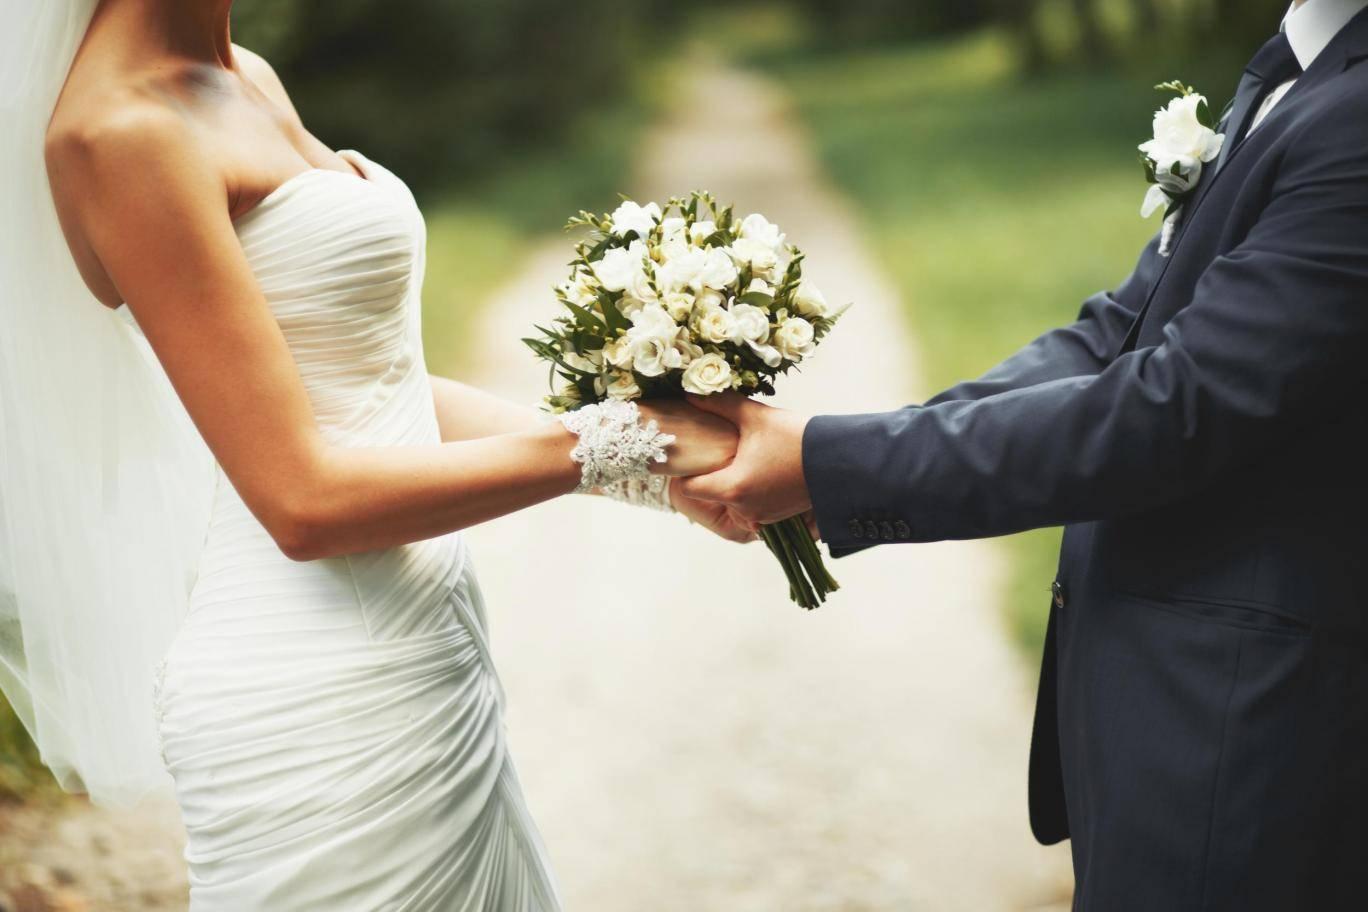 Marriages Between Men And Women Hit Lowest Rate On Record The Independent The Independent